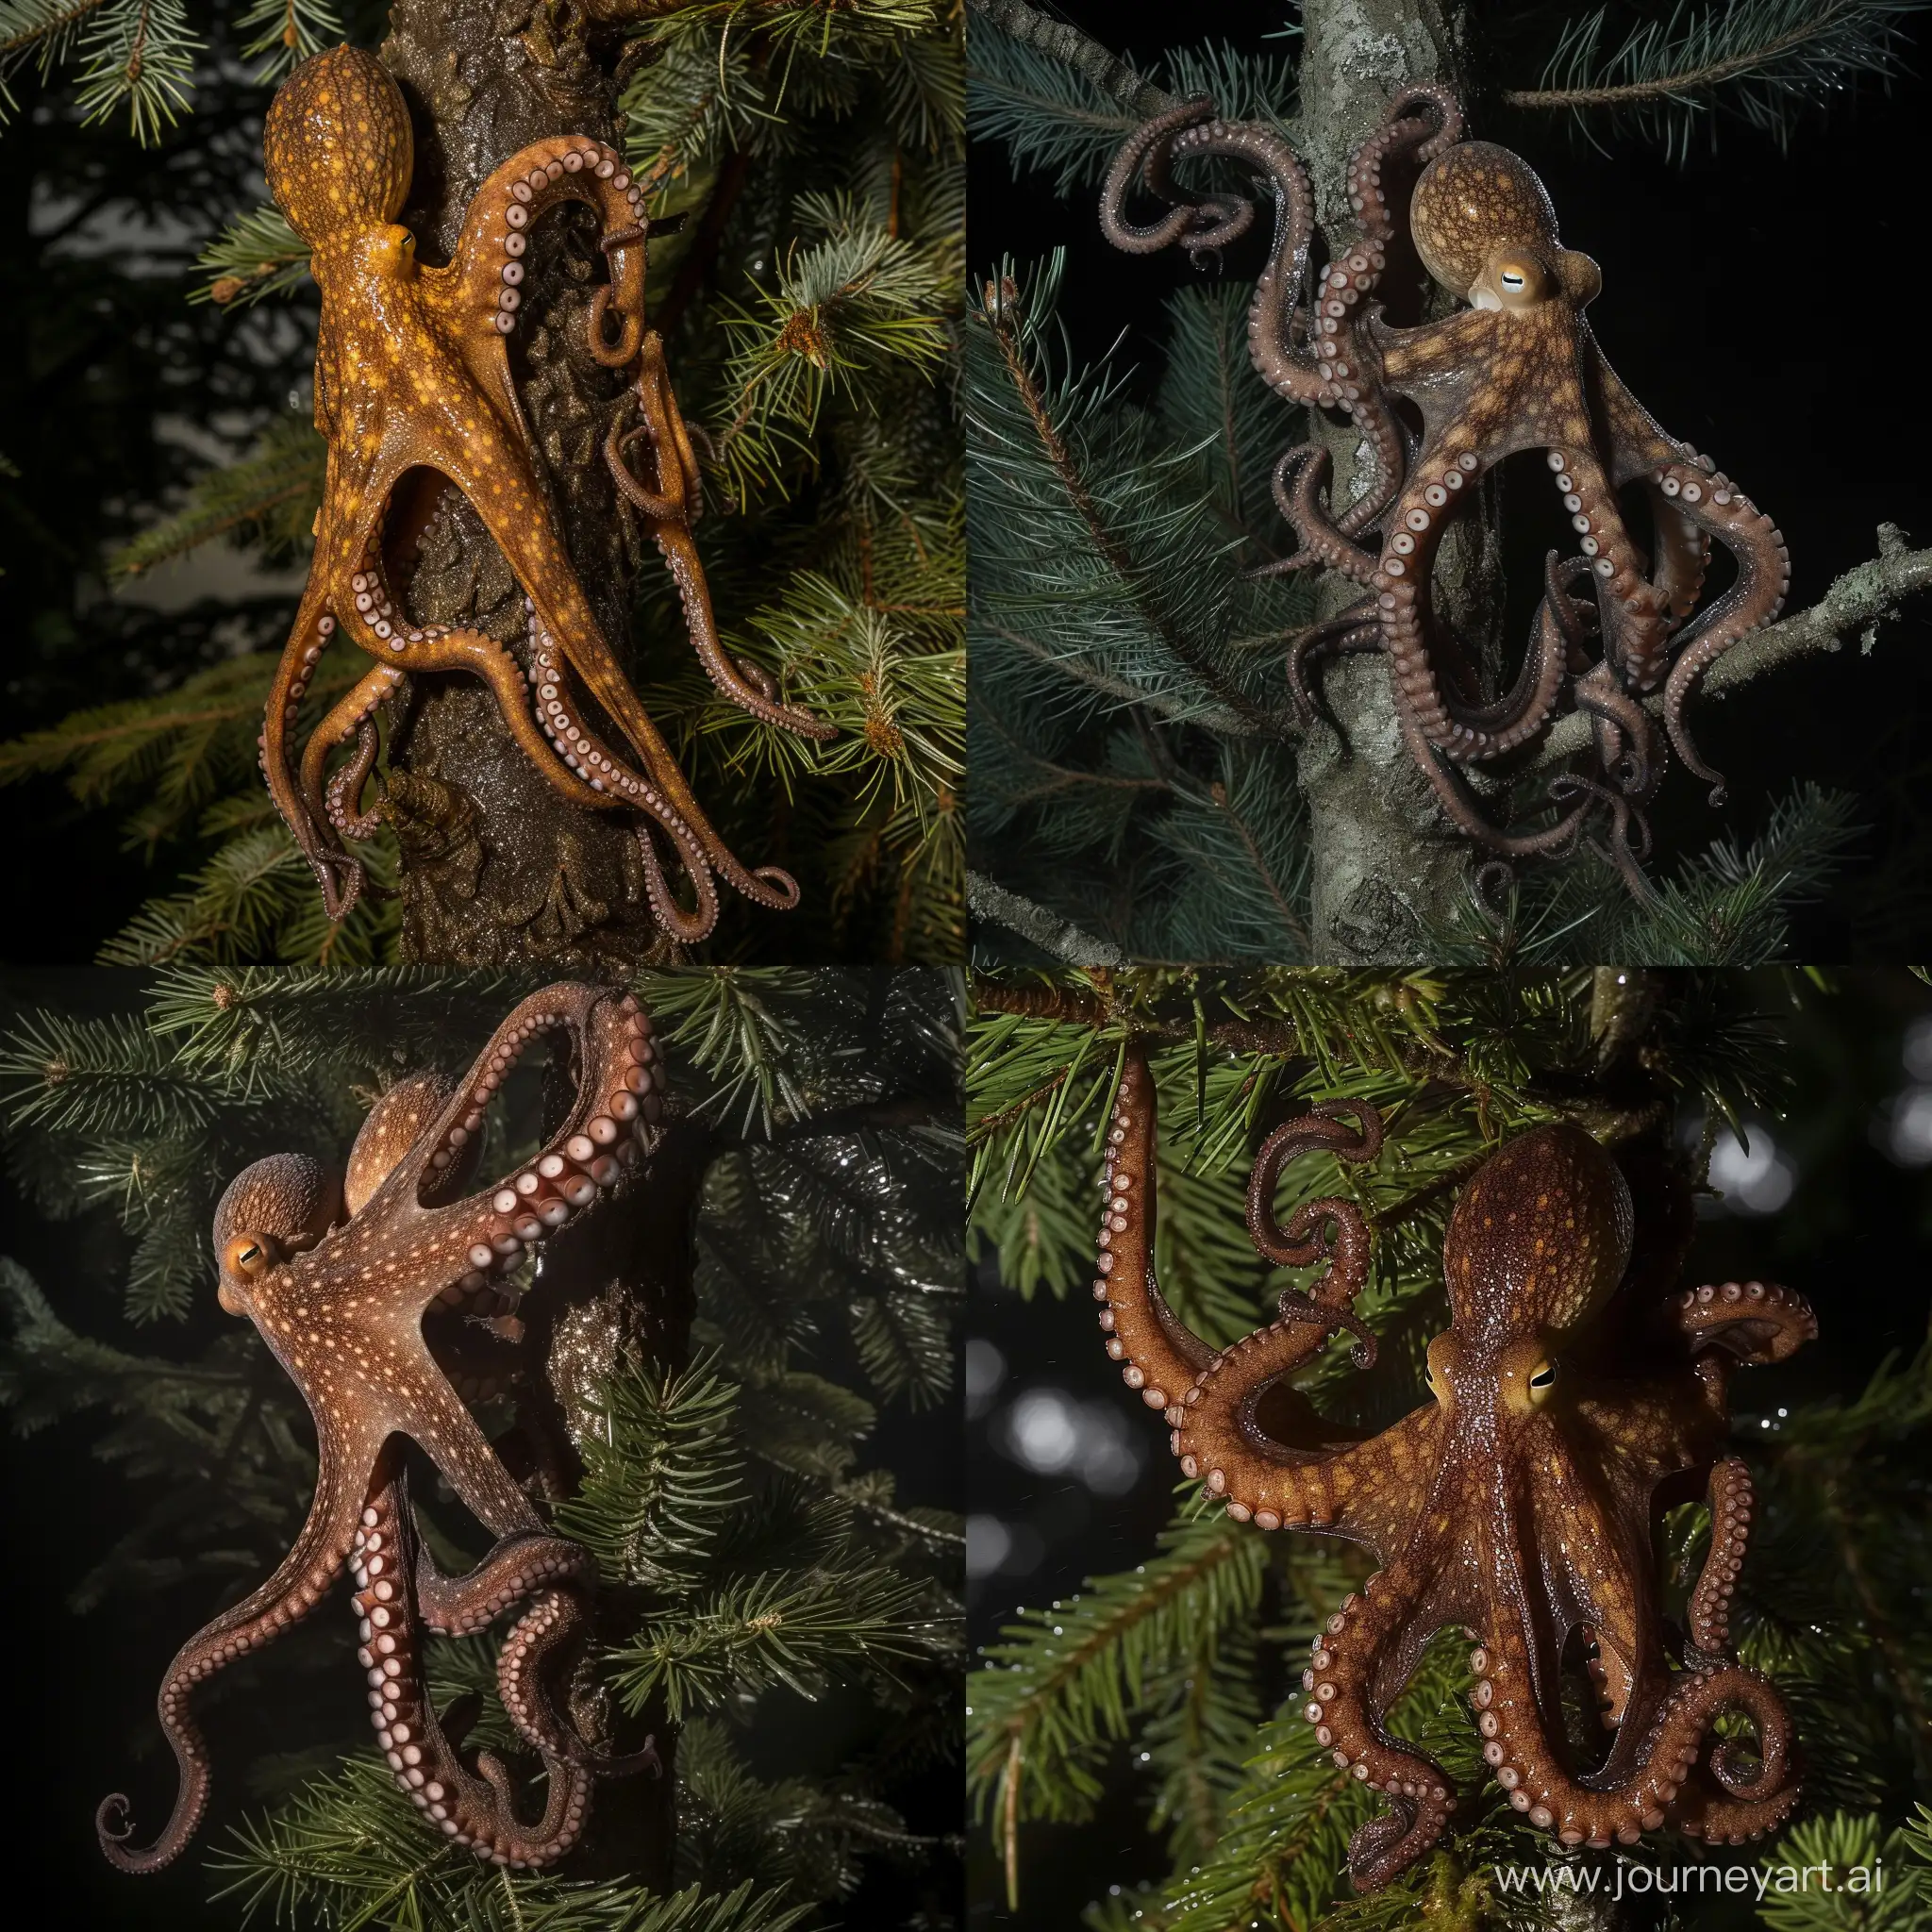 award winning wildlife photo of an wet mottled brown octopus climbing up think pine tree, tentacles wrapped around the branches, body pressed against the tree, temperate pine rainforest, flash photography, telephoto lens, canon camera, extreme wide shot, side view, shadows, specular highlights, Frans Lanting, nature documentary